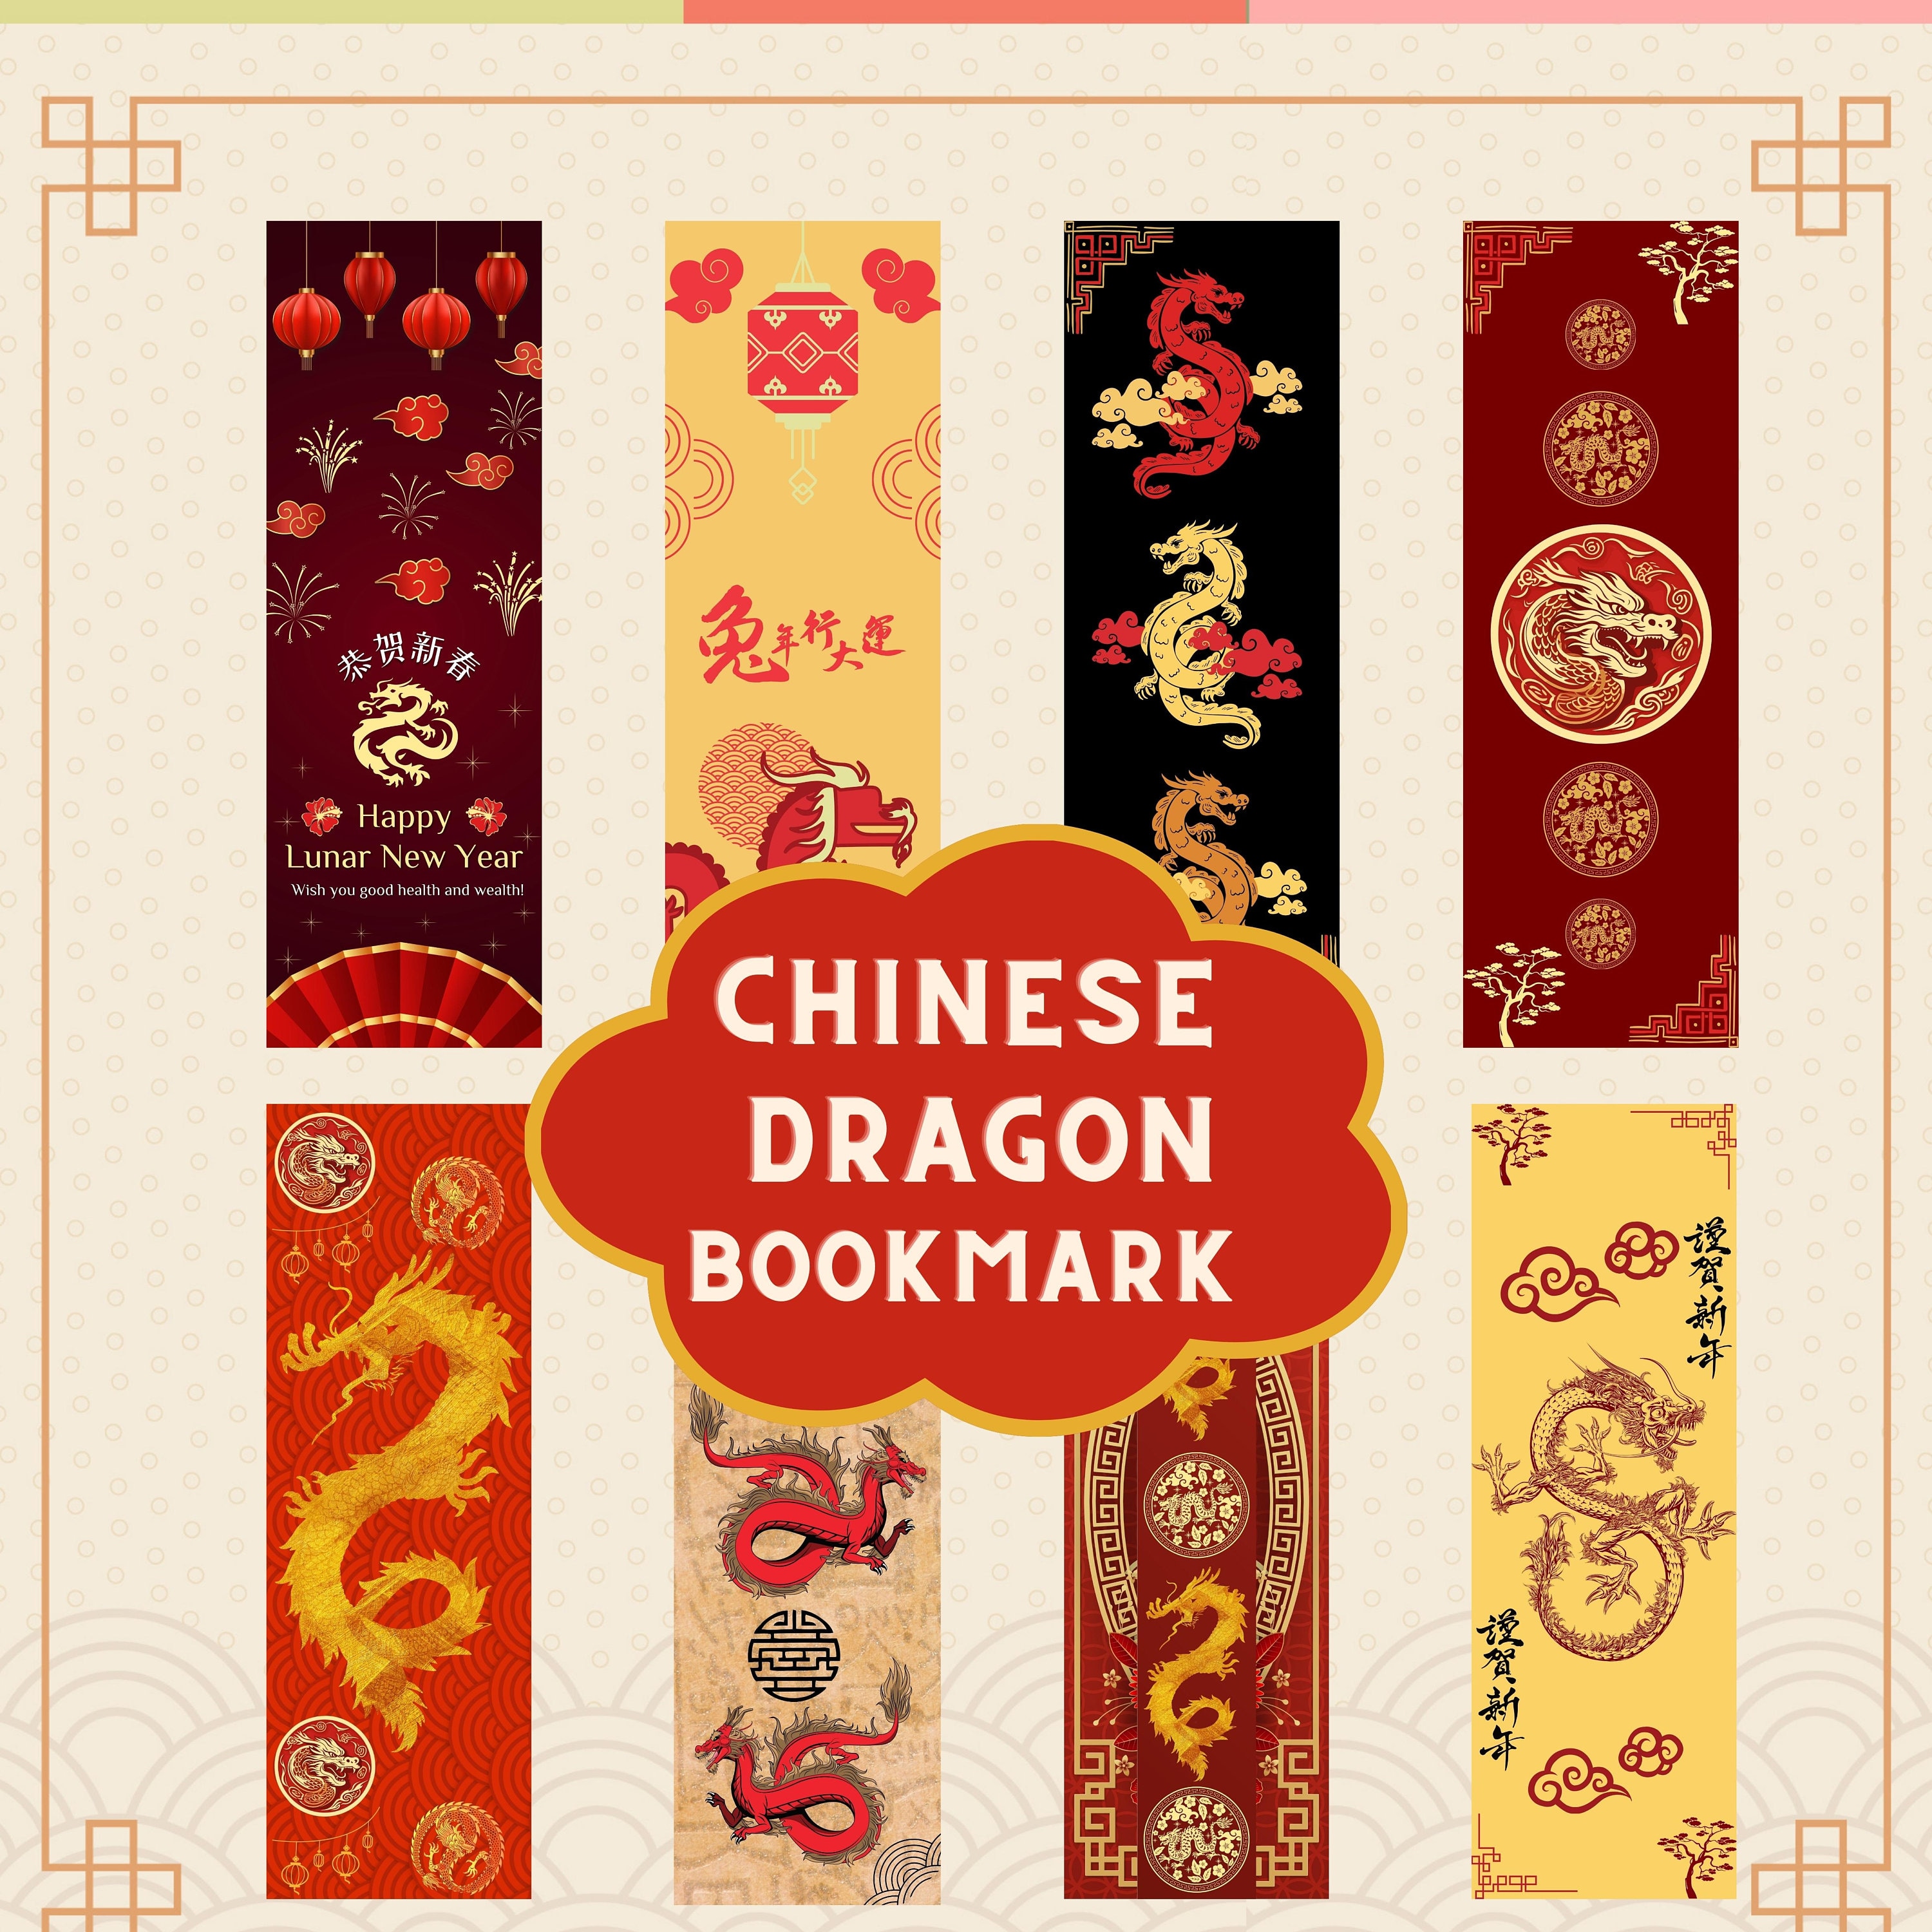 Chinese Wooden Bookmarks 1 x 4 Set of 9 Scenery Bookmarks in